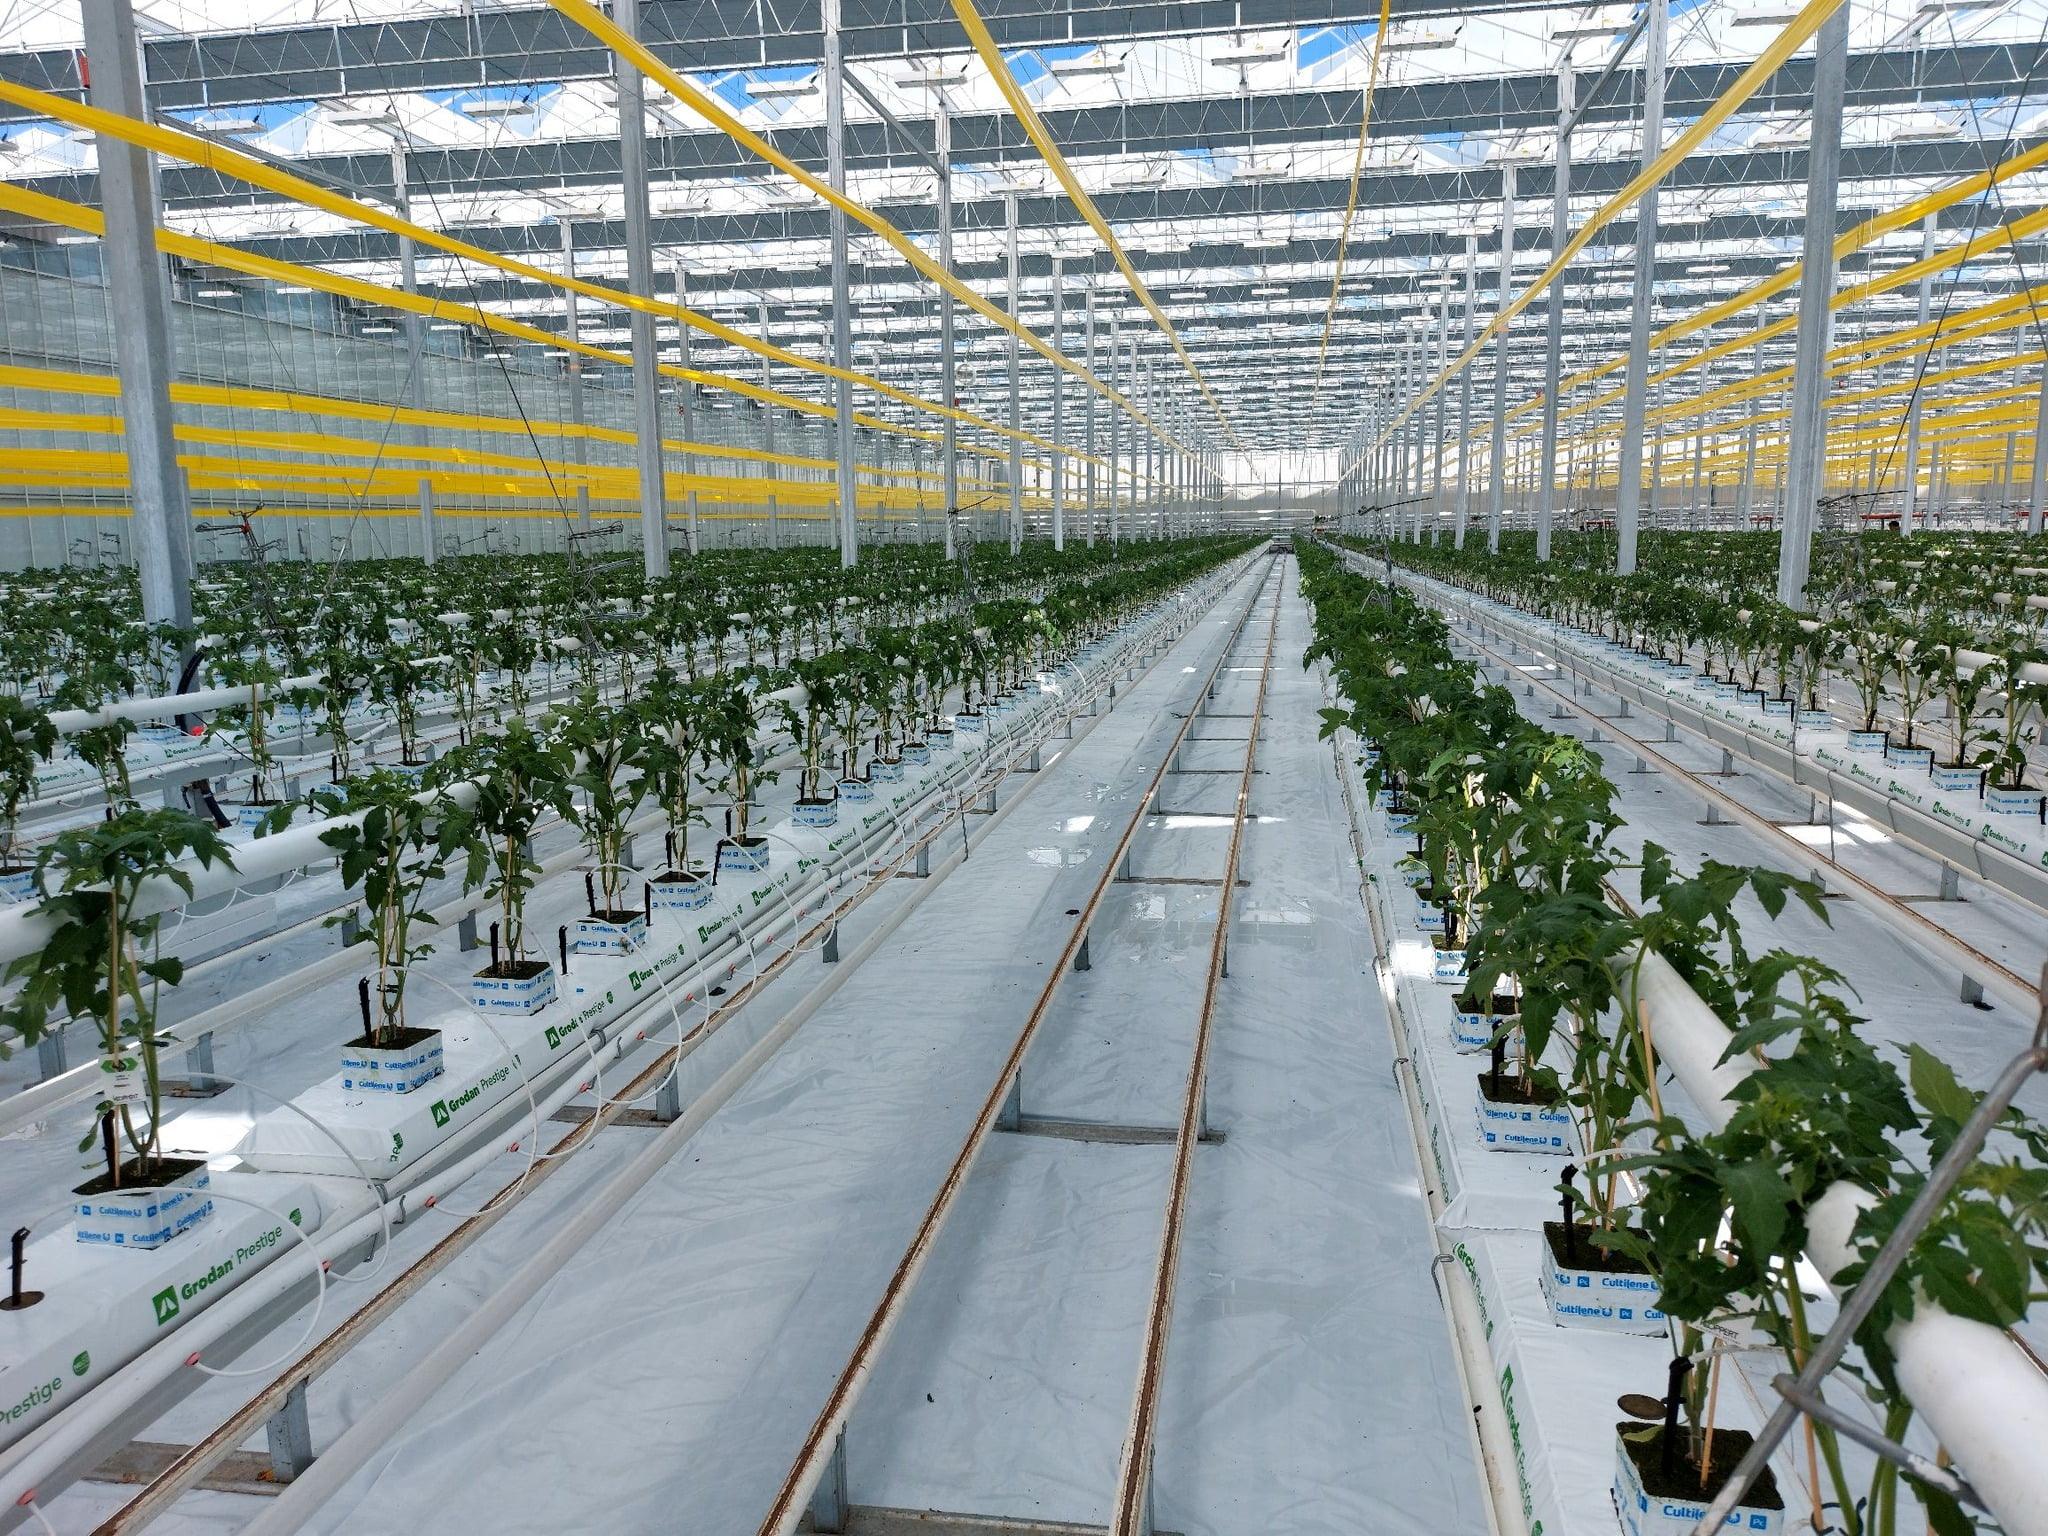 Very long rows of infant tomatoes plants in a large greenhouse